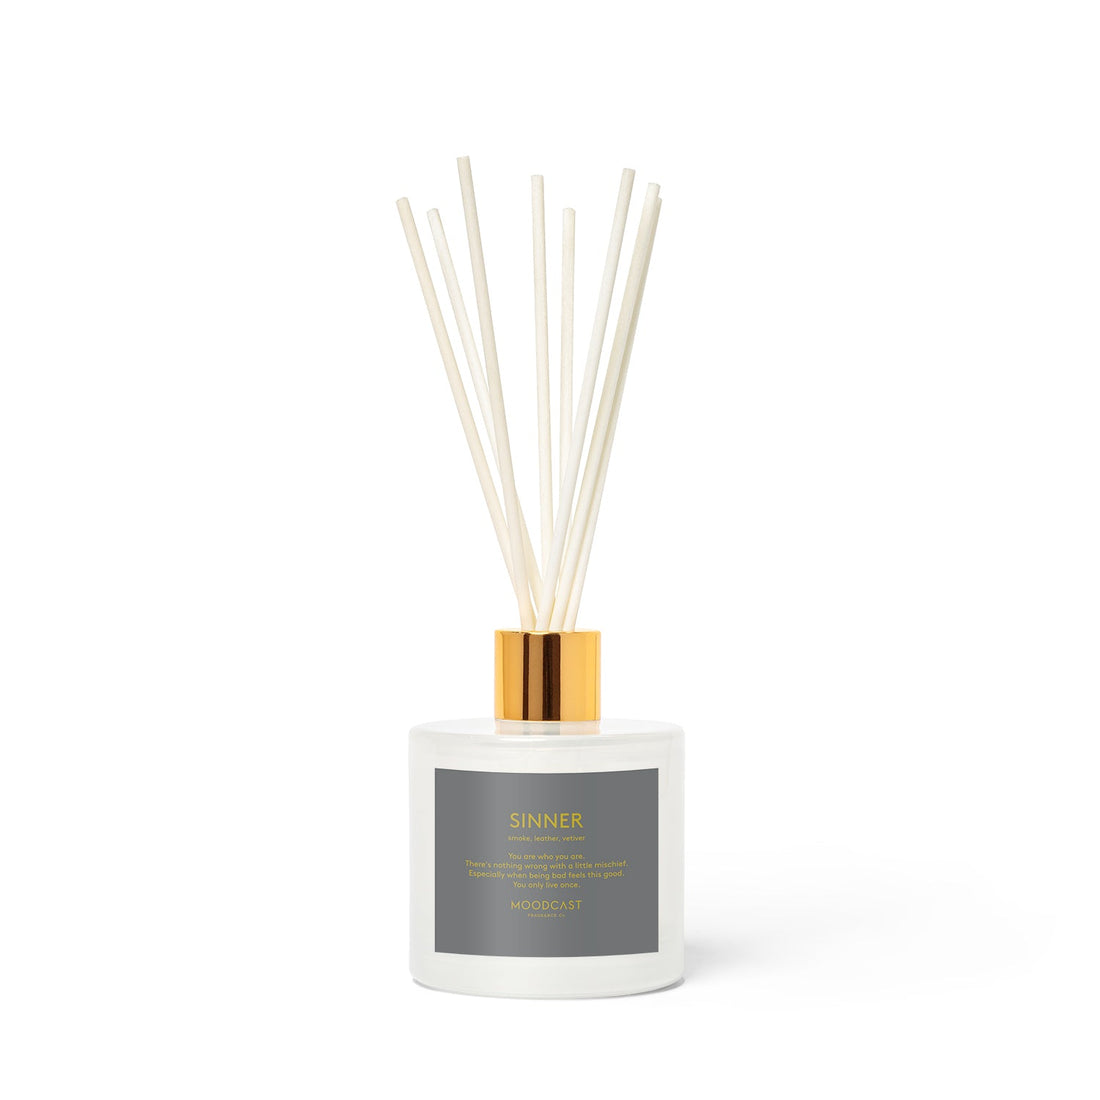 Sinner - Persona Collection (White & Gold) - 3.4fl oz/100ml Glass Reed Diffuser - Key Notes: Smoke, Leather, Vetiver